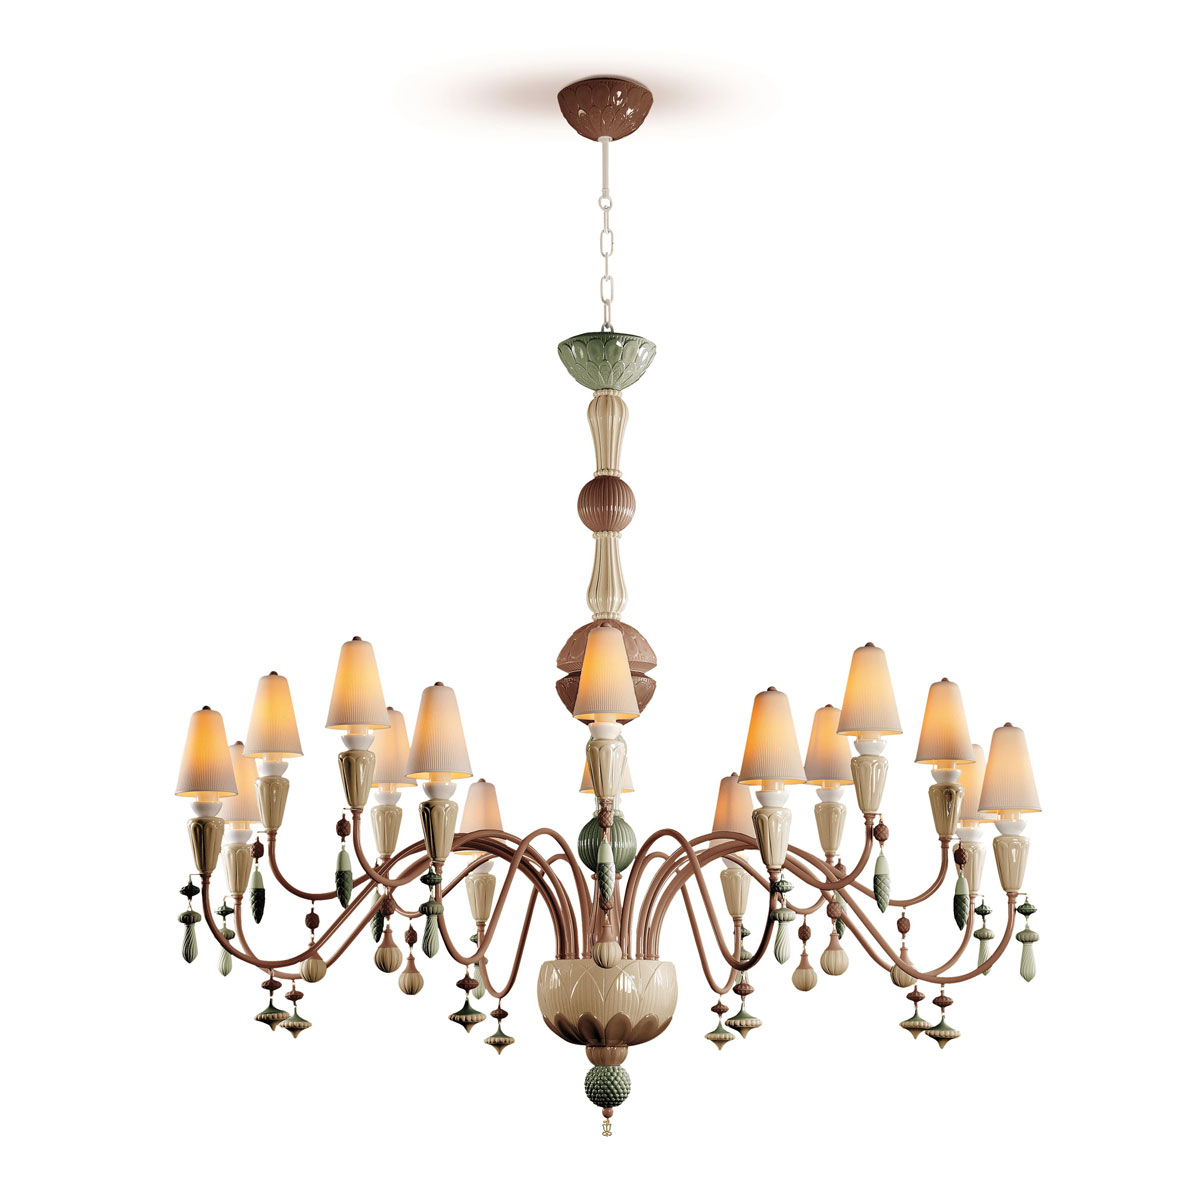 Lladro Classic Lighting, Ivy And Seed 16 Lights Chandelier. Large Flat Model. Spices